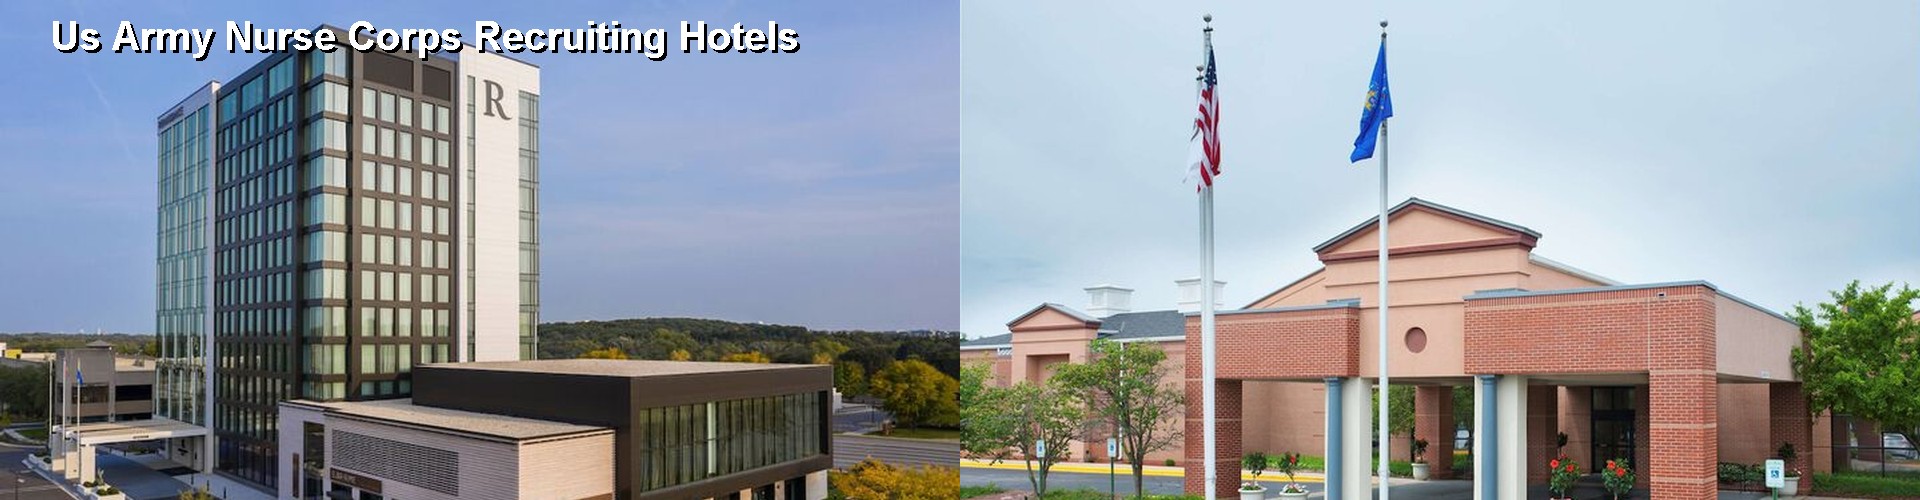 4 Best Hotels near Us Army Nurse Corps Recruiting